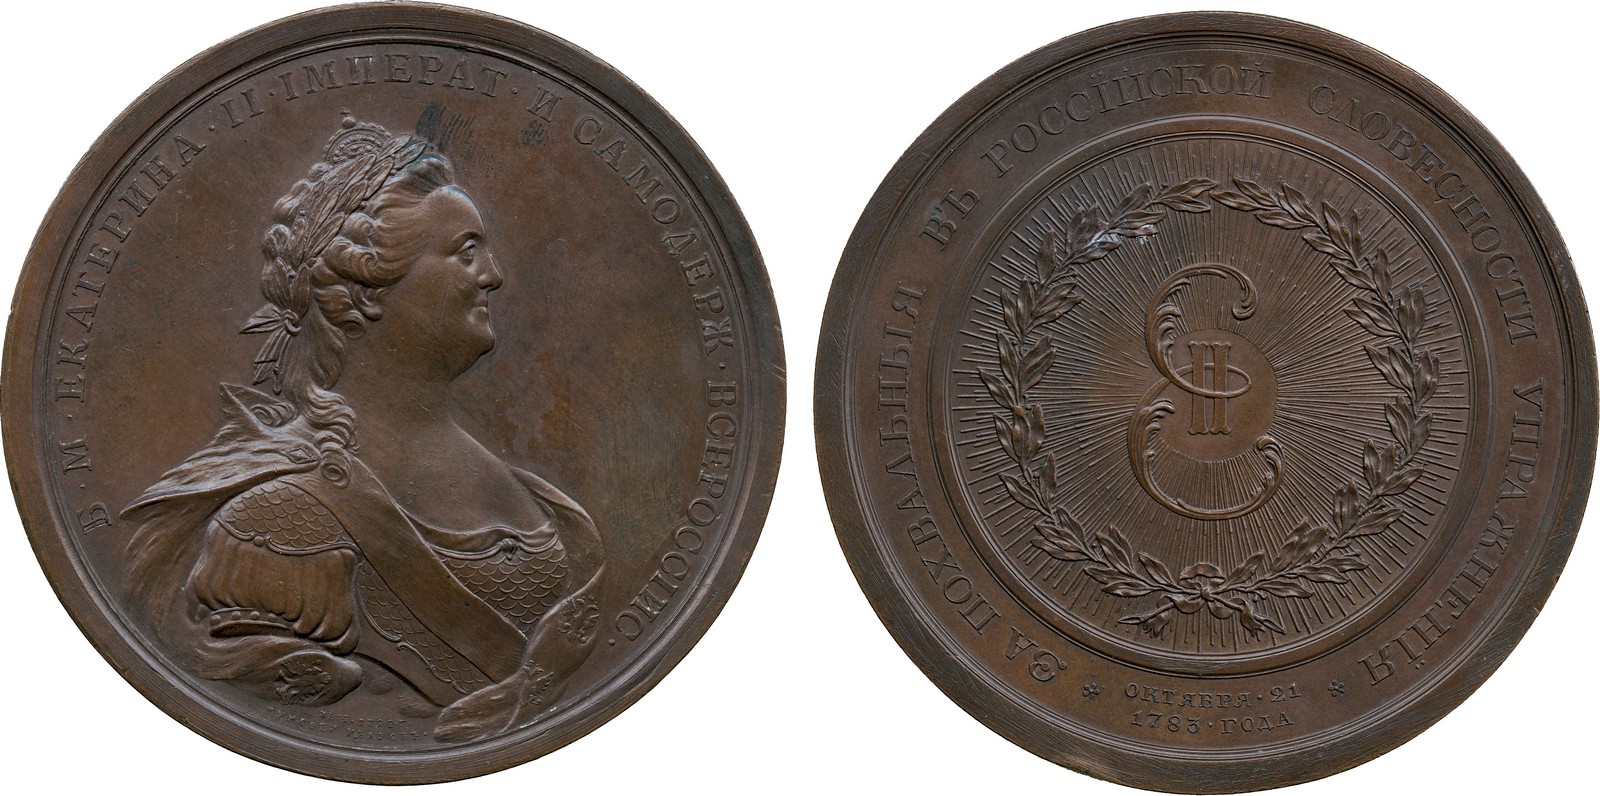 COMMEMORATIVE MEDALS, WORLD MEDALS, Russia, Catherine II, Russian Academy of Sciences 1783, Bronze